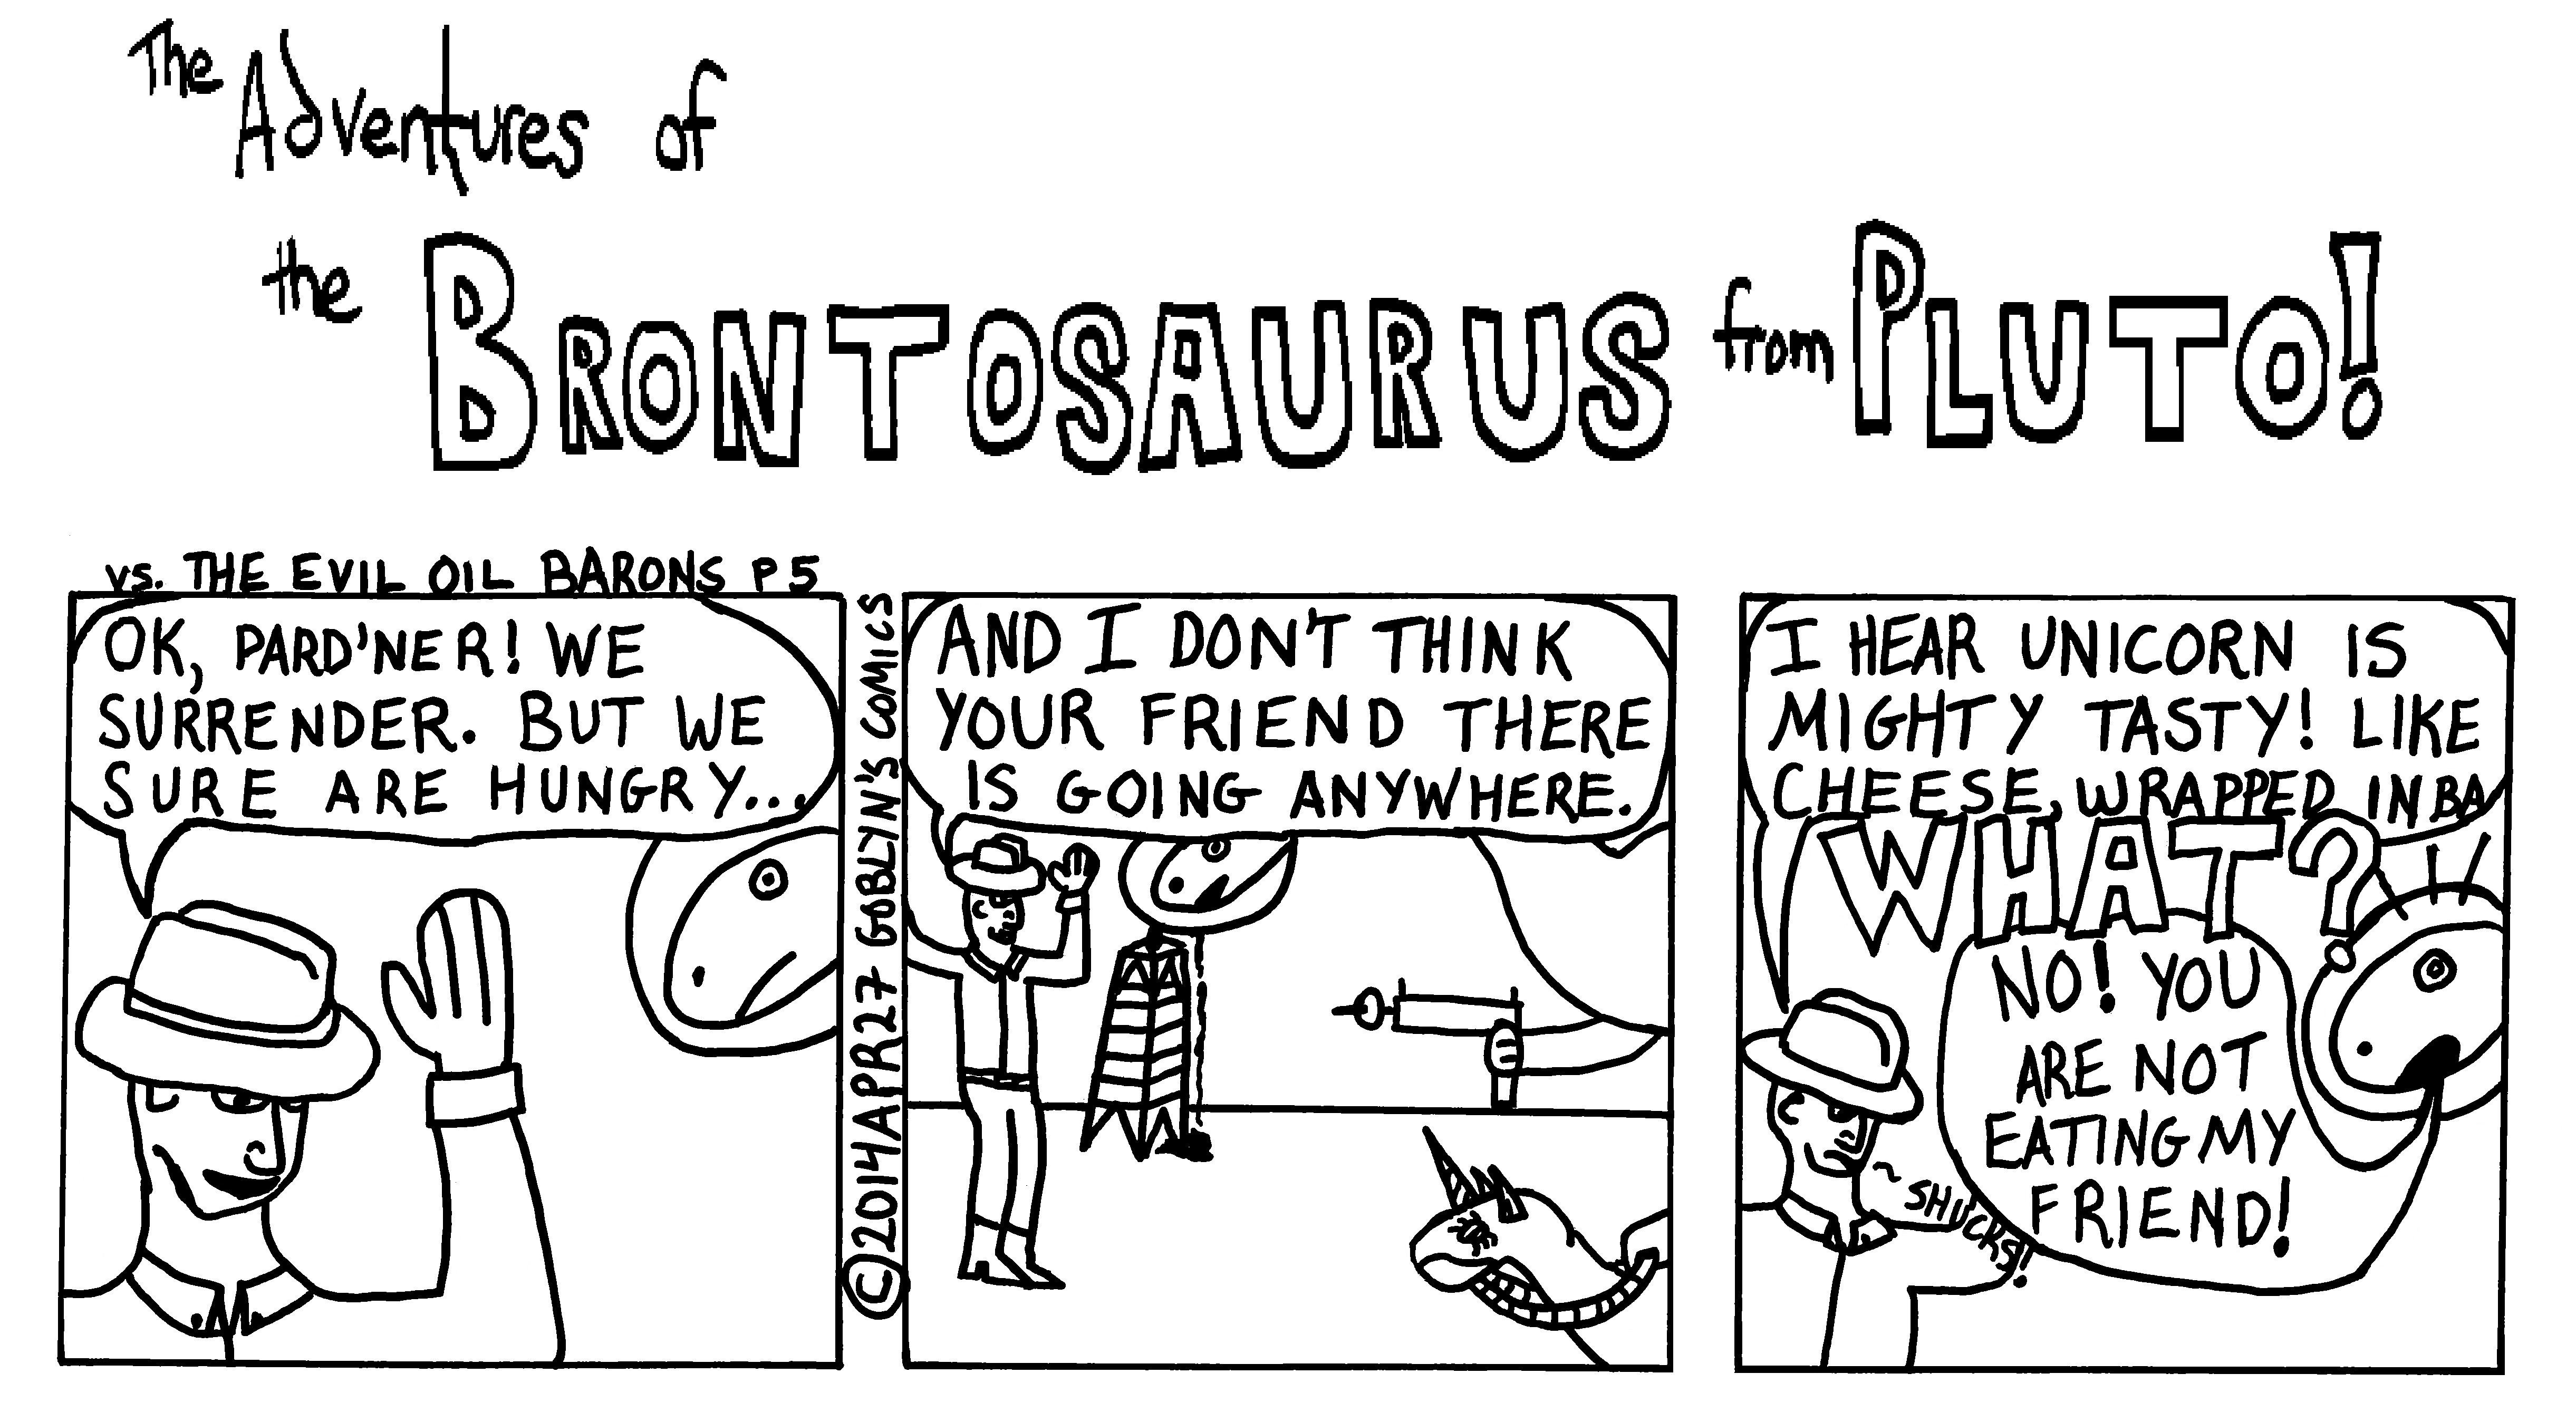 The Adventures of the Brontosaurus from Pluto! vs the Evil Oil Barons Part 5. "We surrender, but boy, we sure are hungry. How about if we eat the Unicorn from Atlantis? I hear that unicorn meat tastes like cheese, wrapped in bacon, with a hint of apricot jam..."